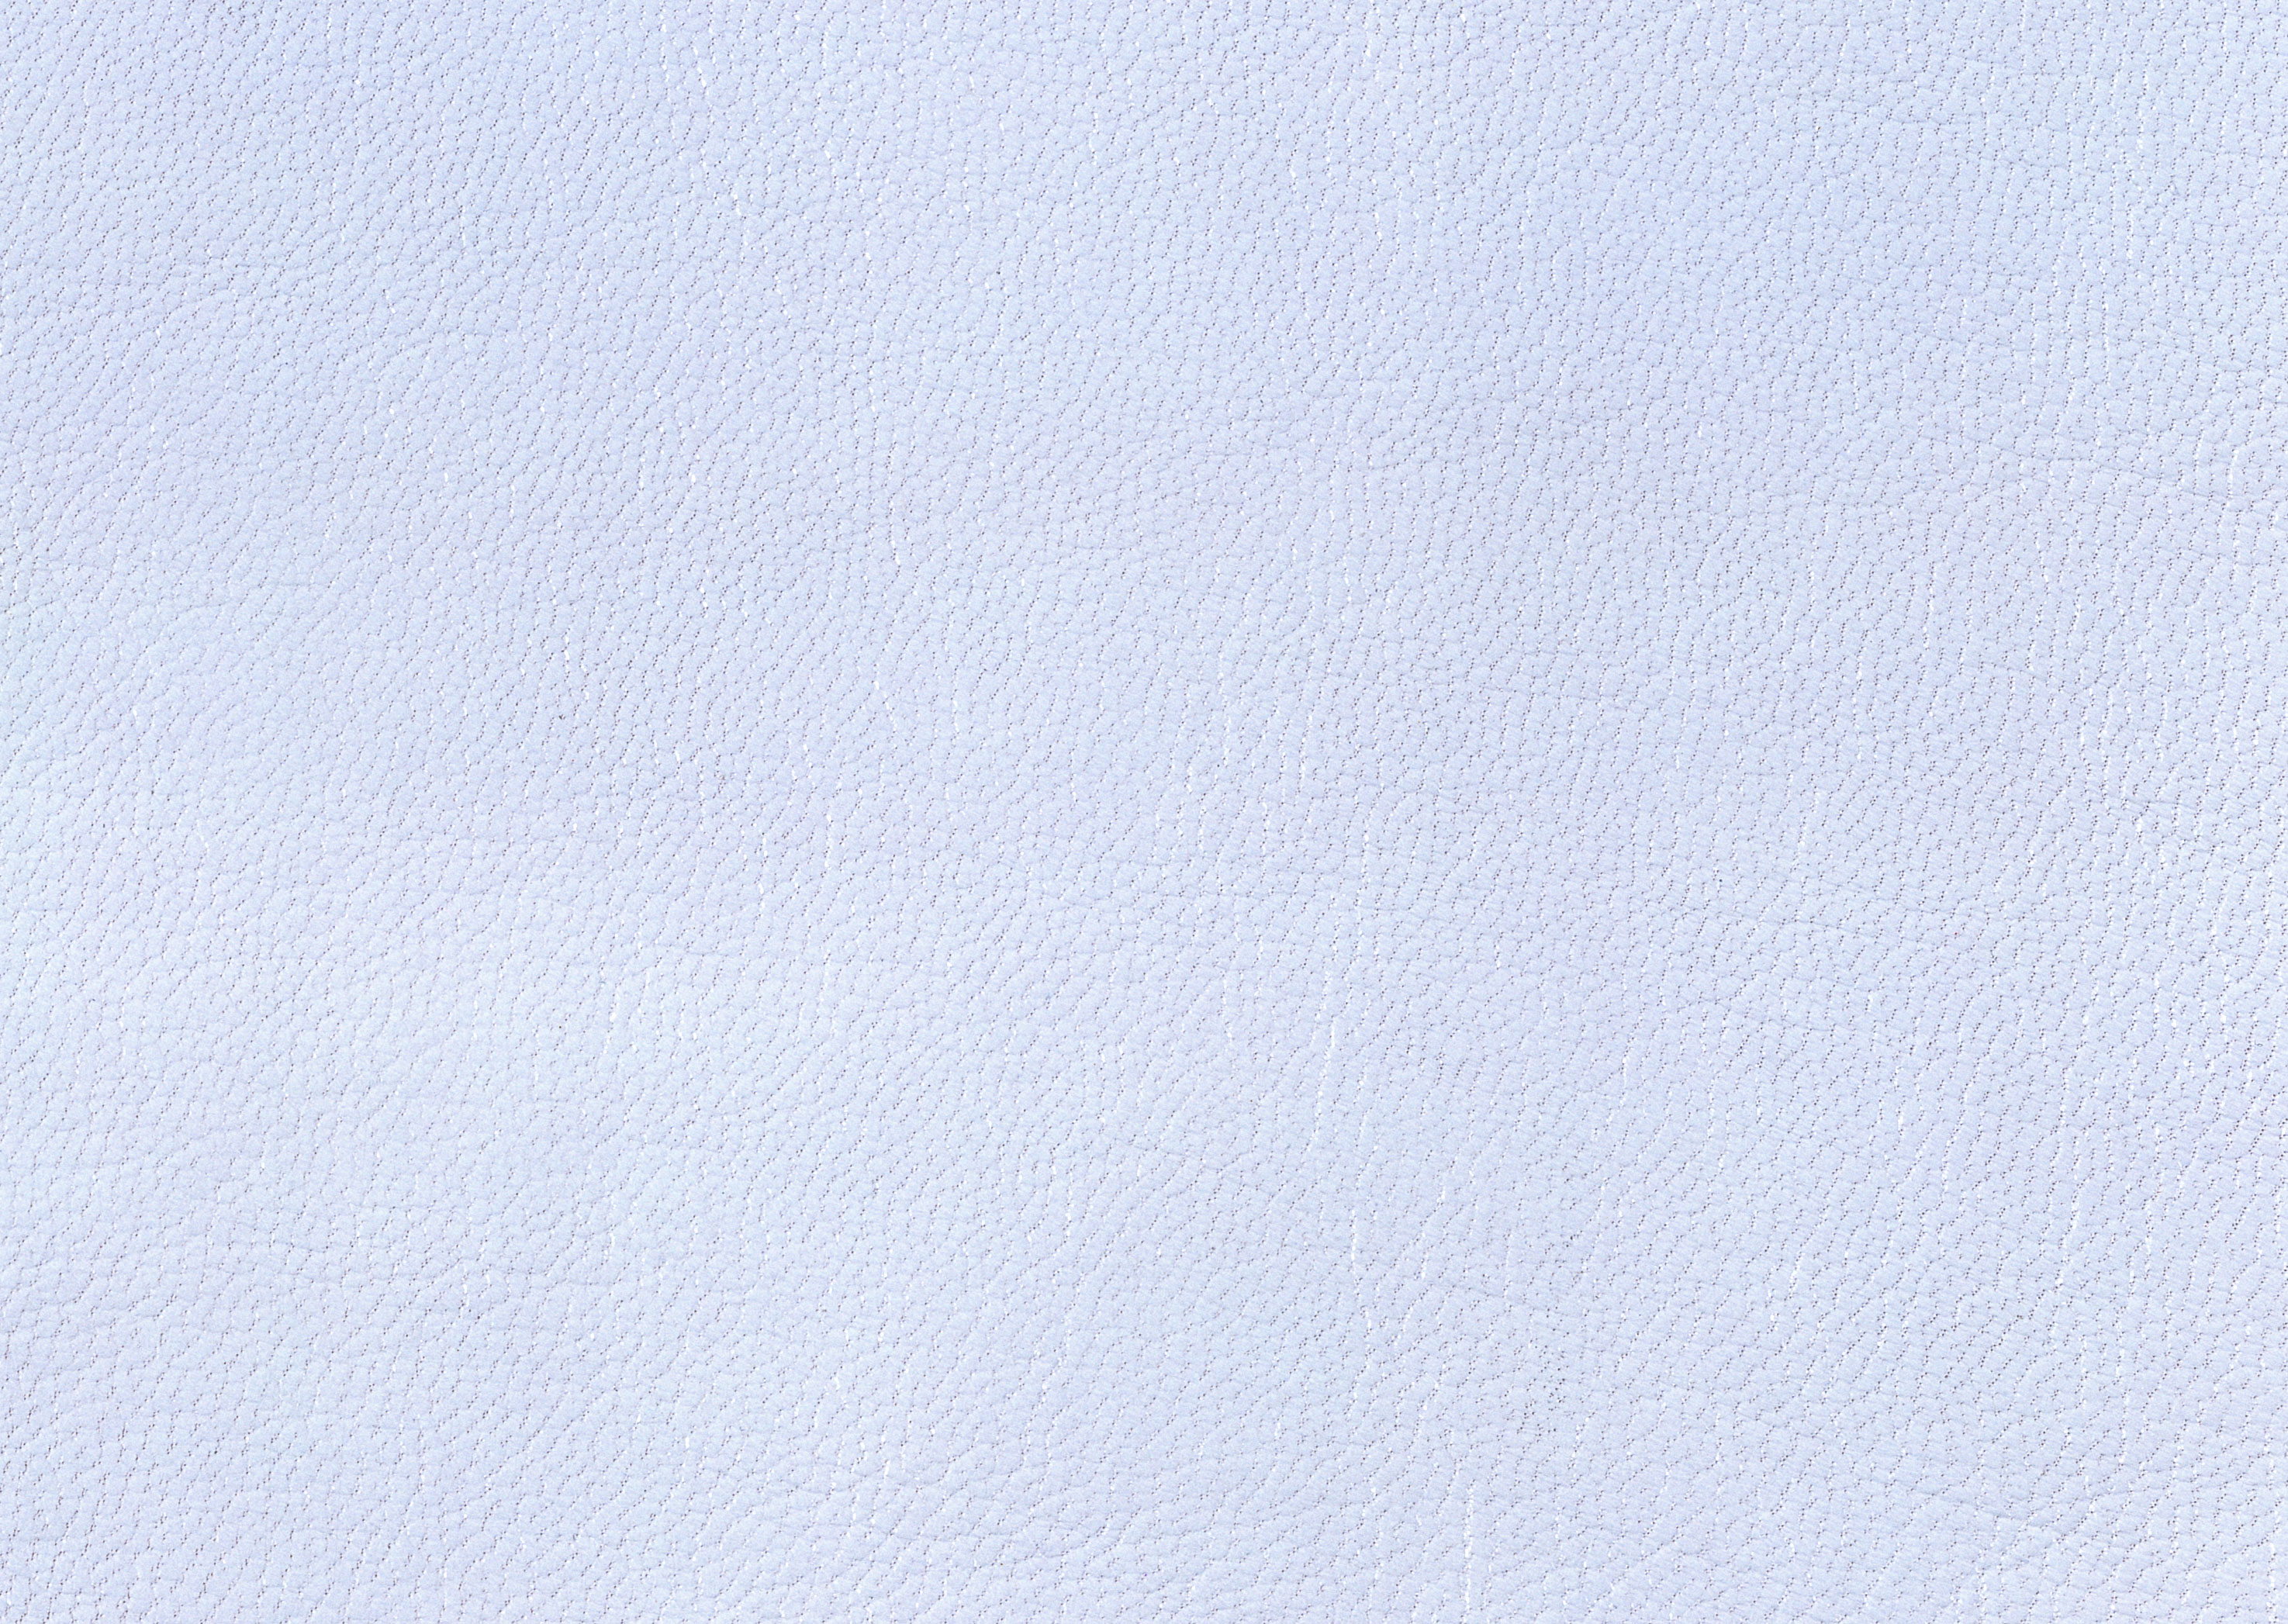 Download texture White leather texture background image free download